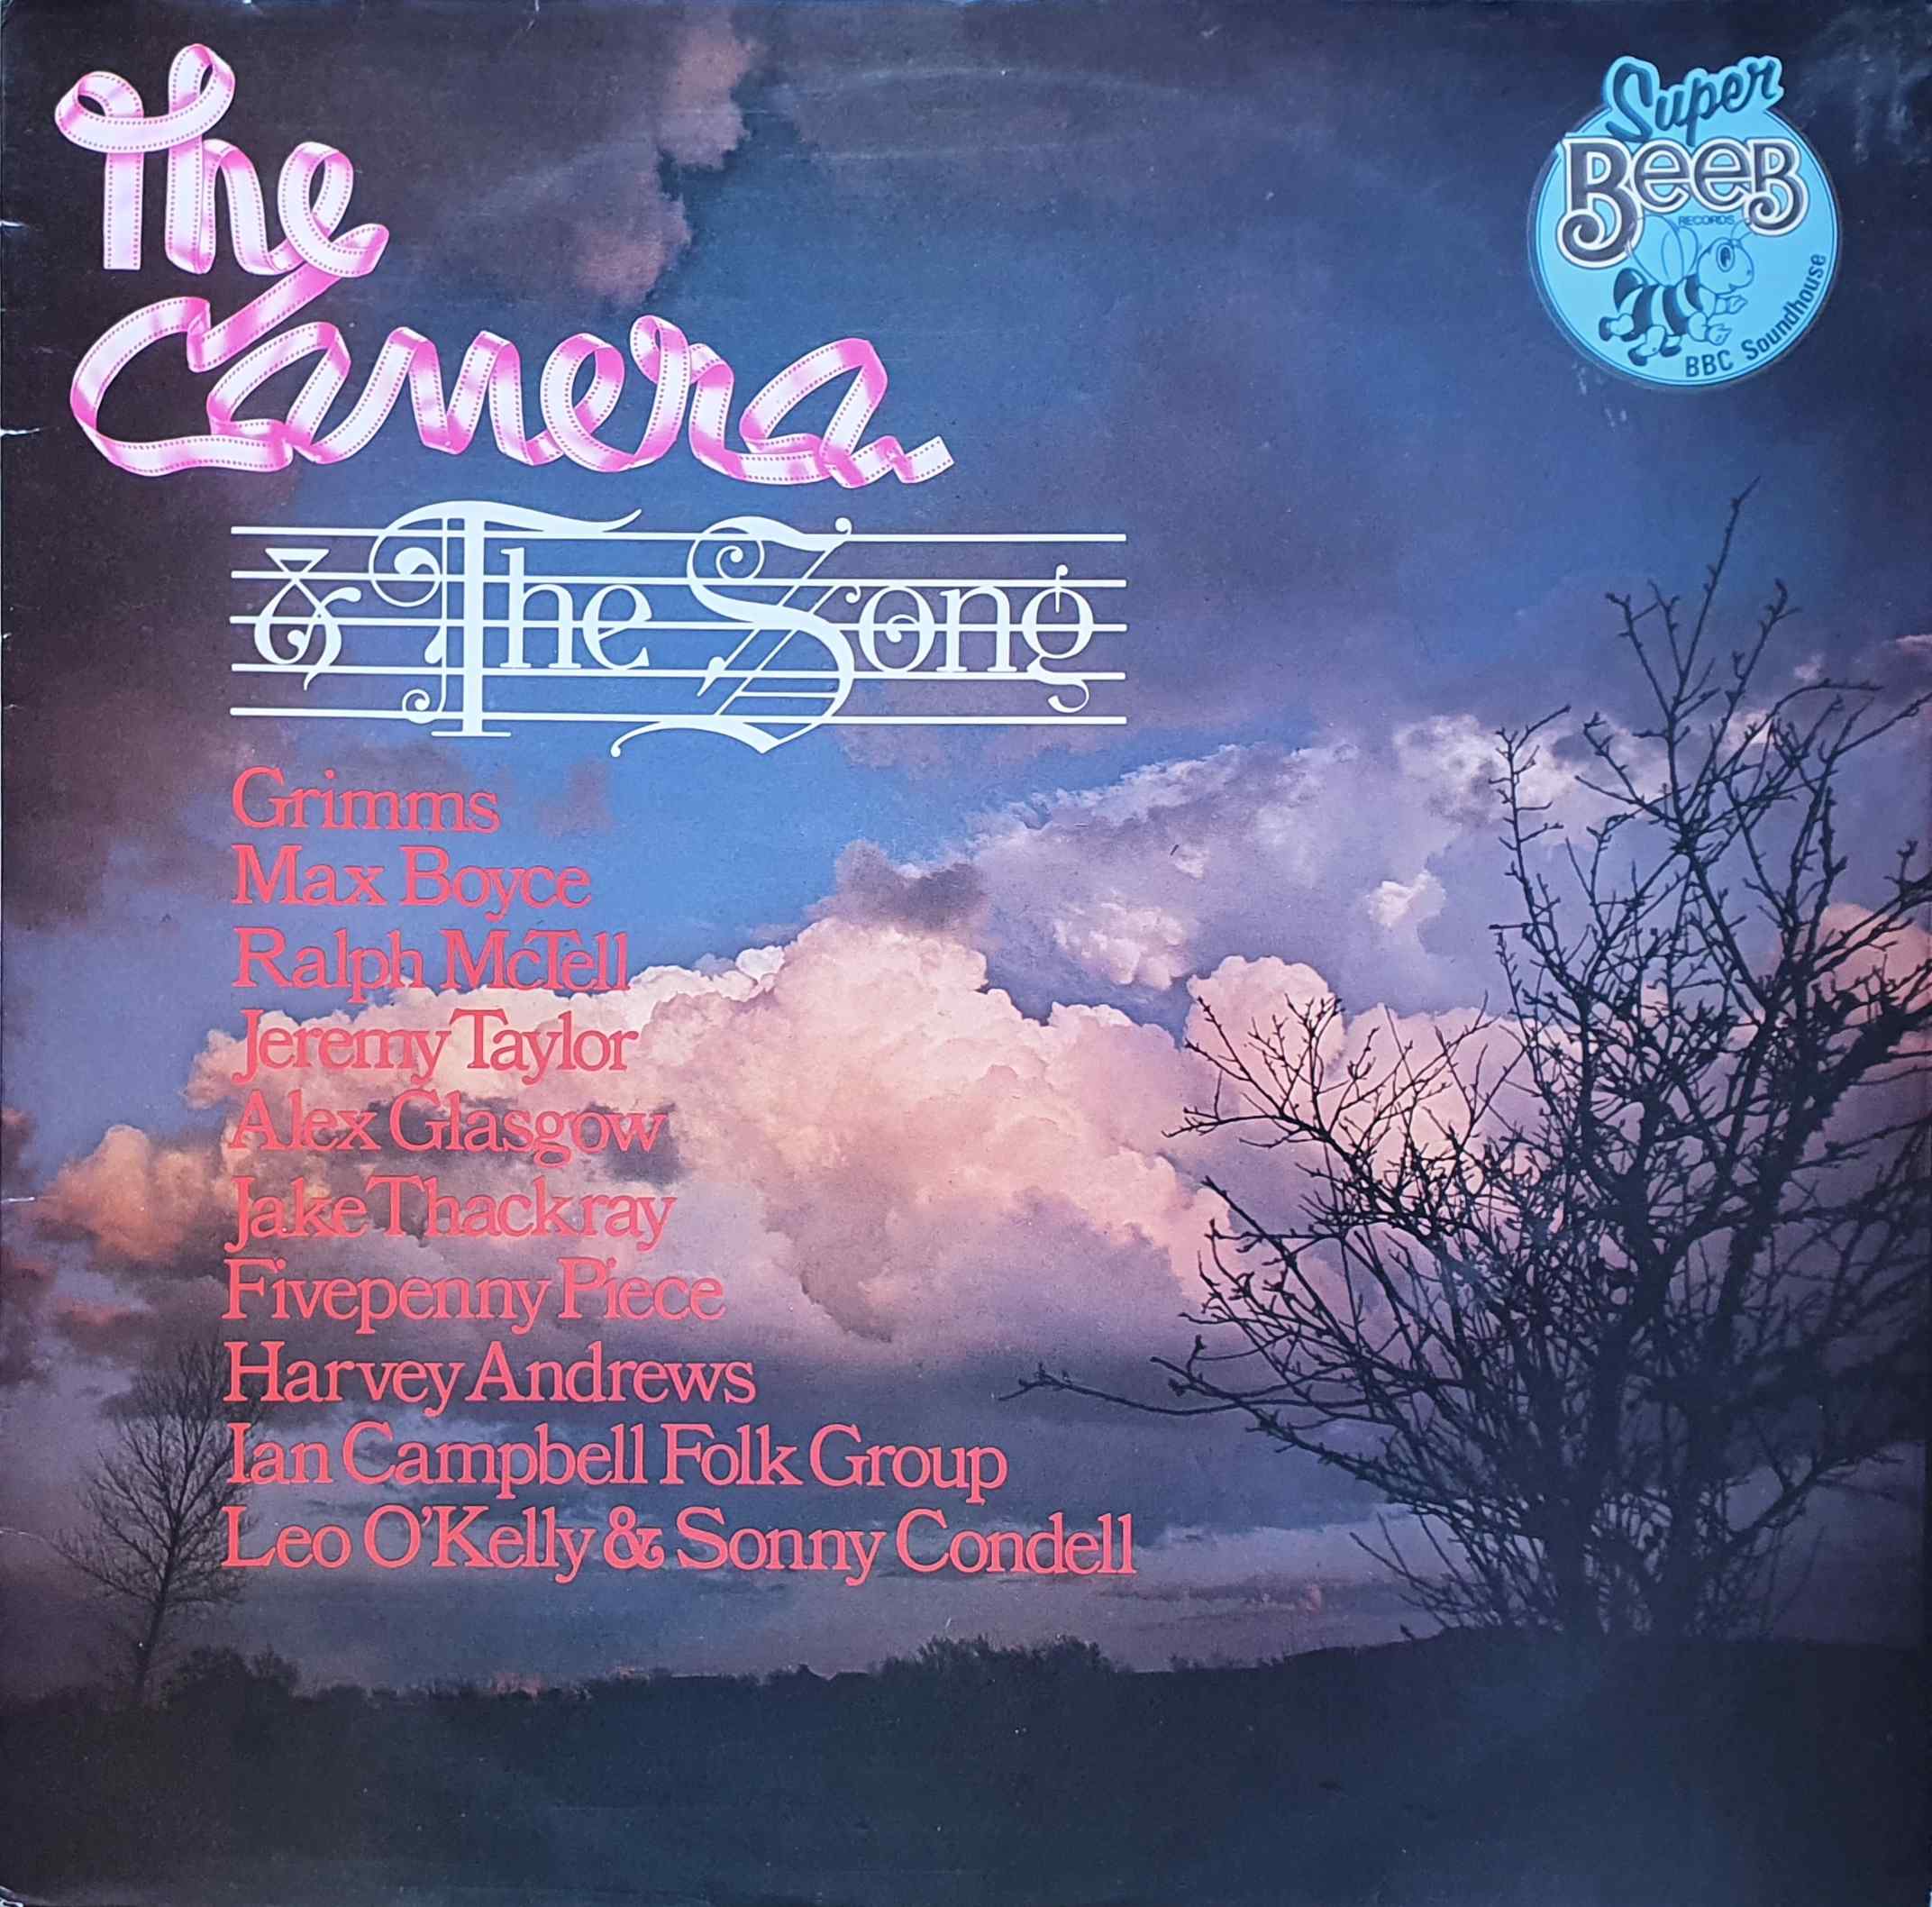 Picture of BELP 006 The camera and the song - Various by artist Various from the BBC albums - Records and Tapes library